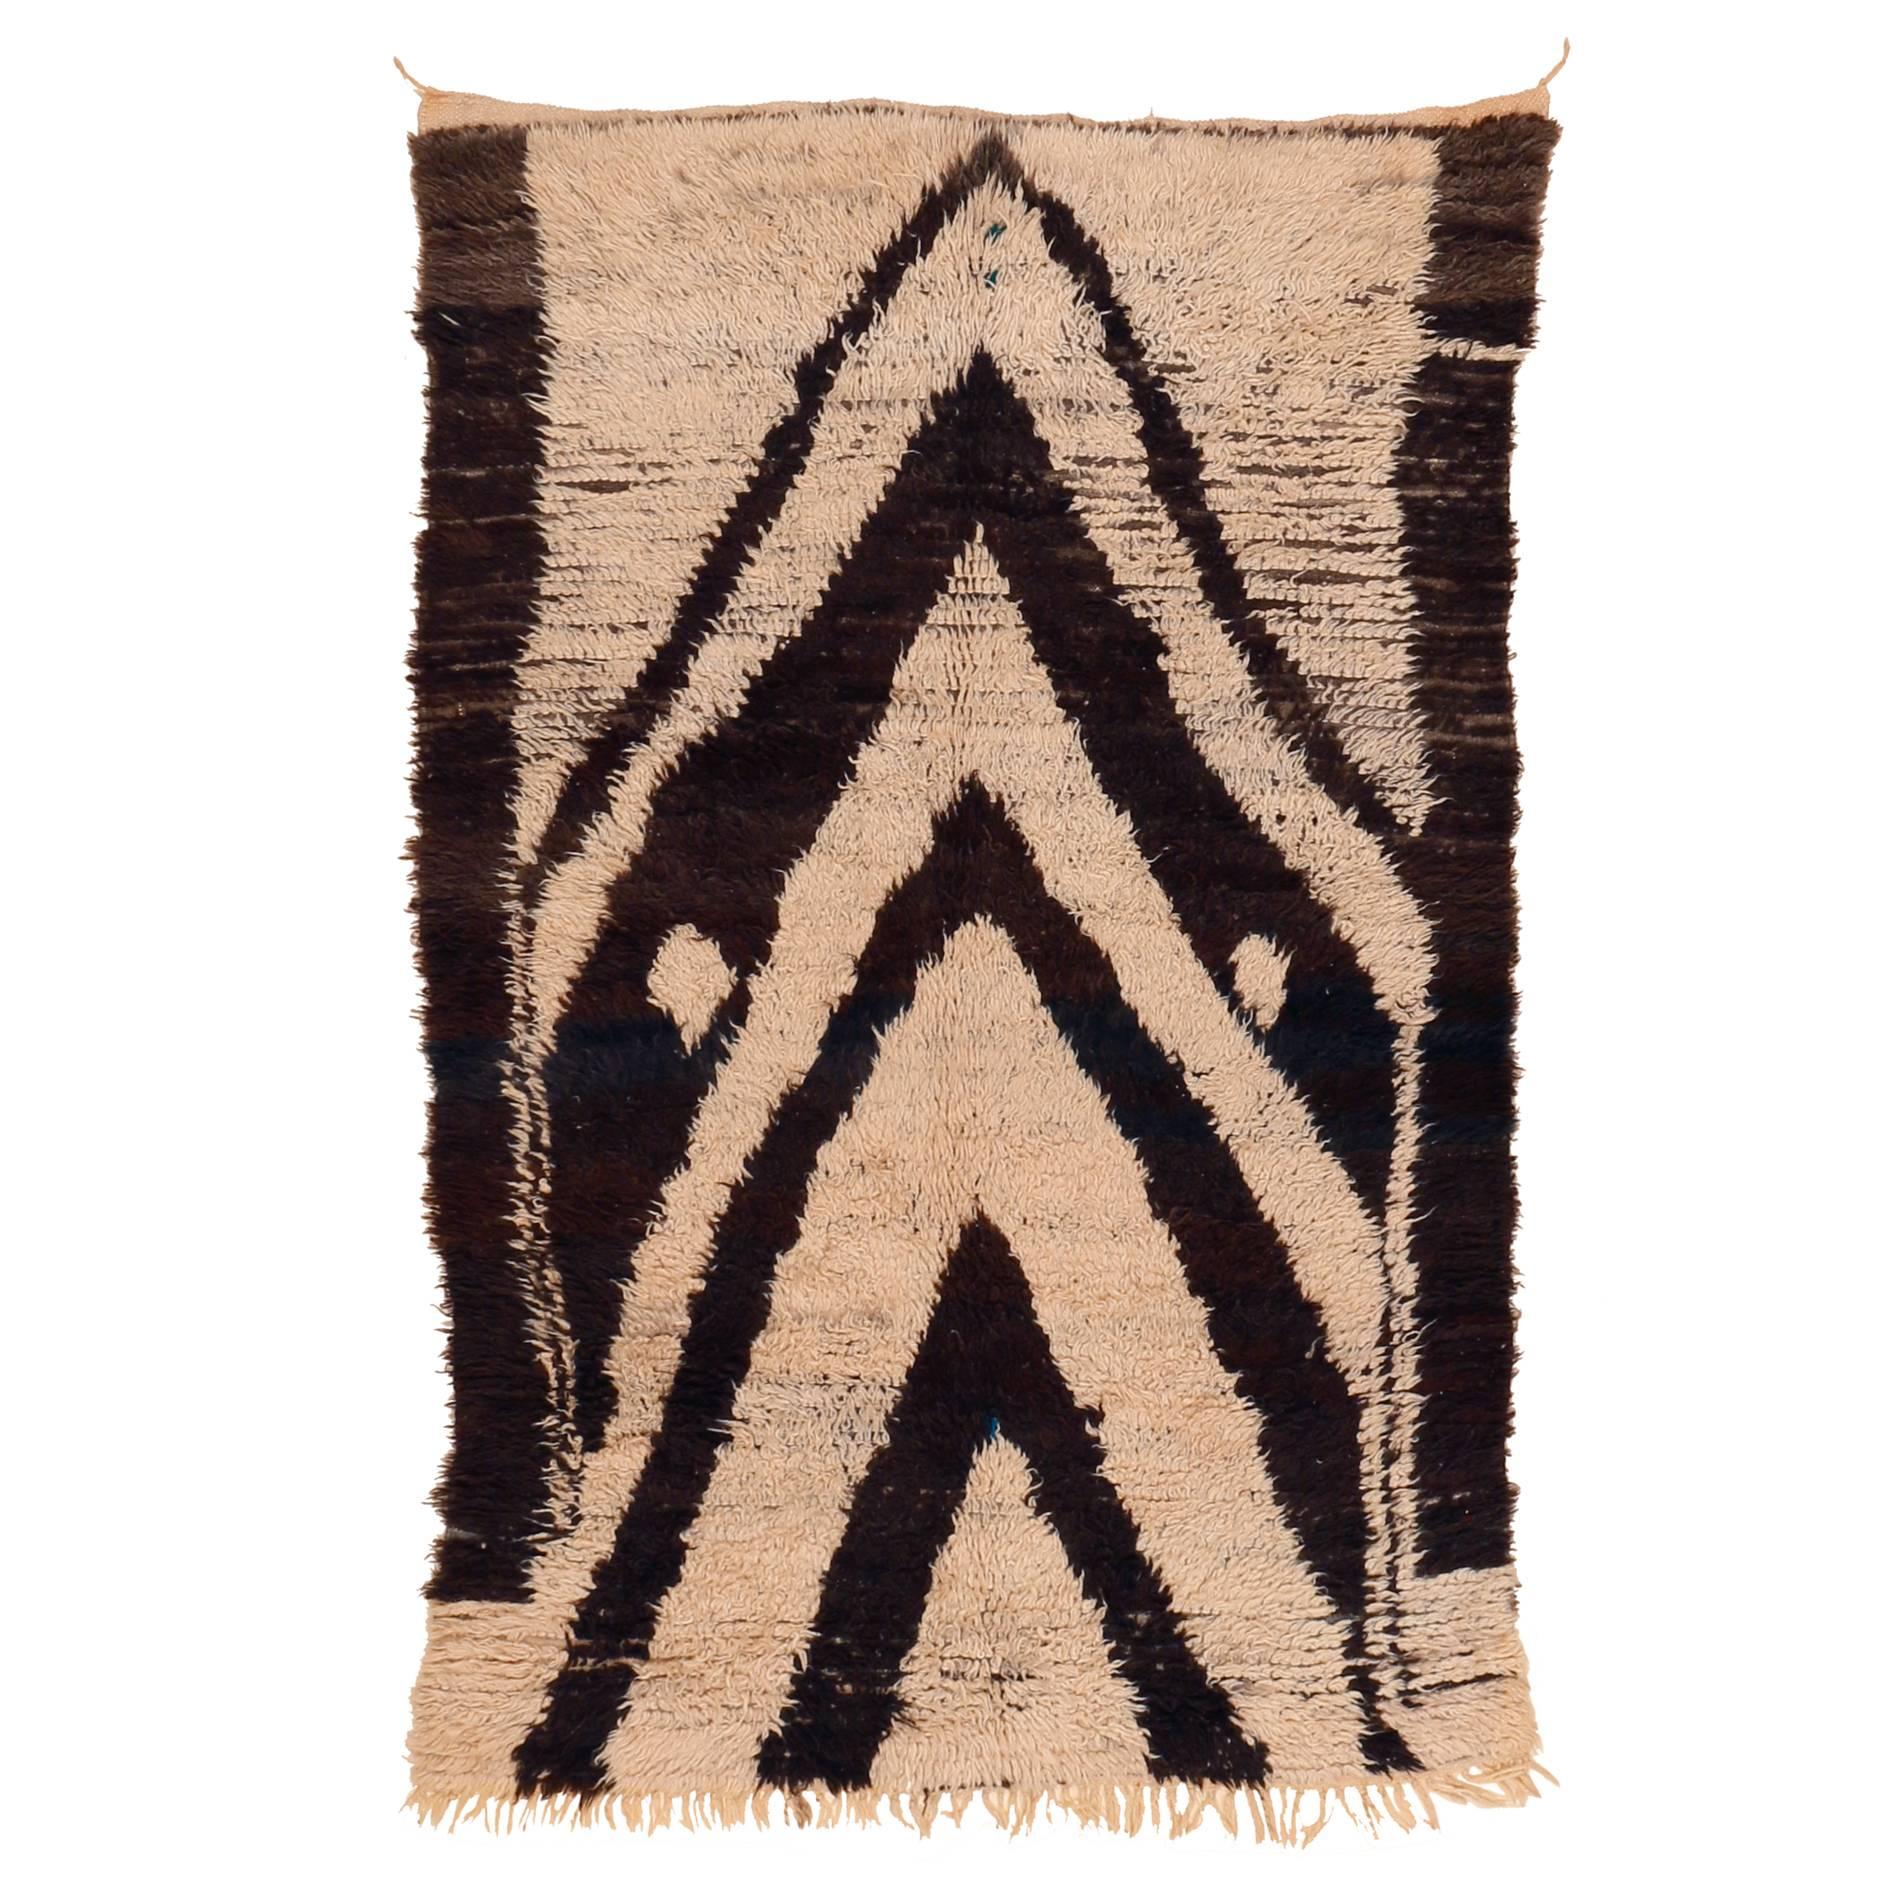 Dramatic Azilal Berber Rug with Stacked Niches